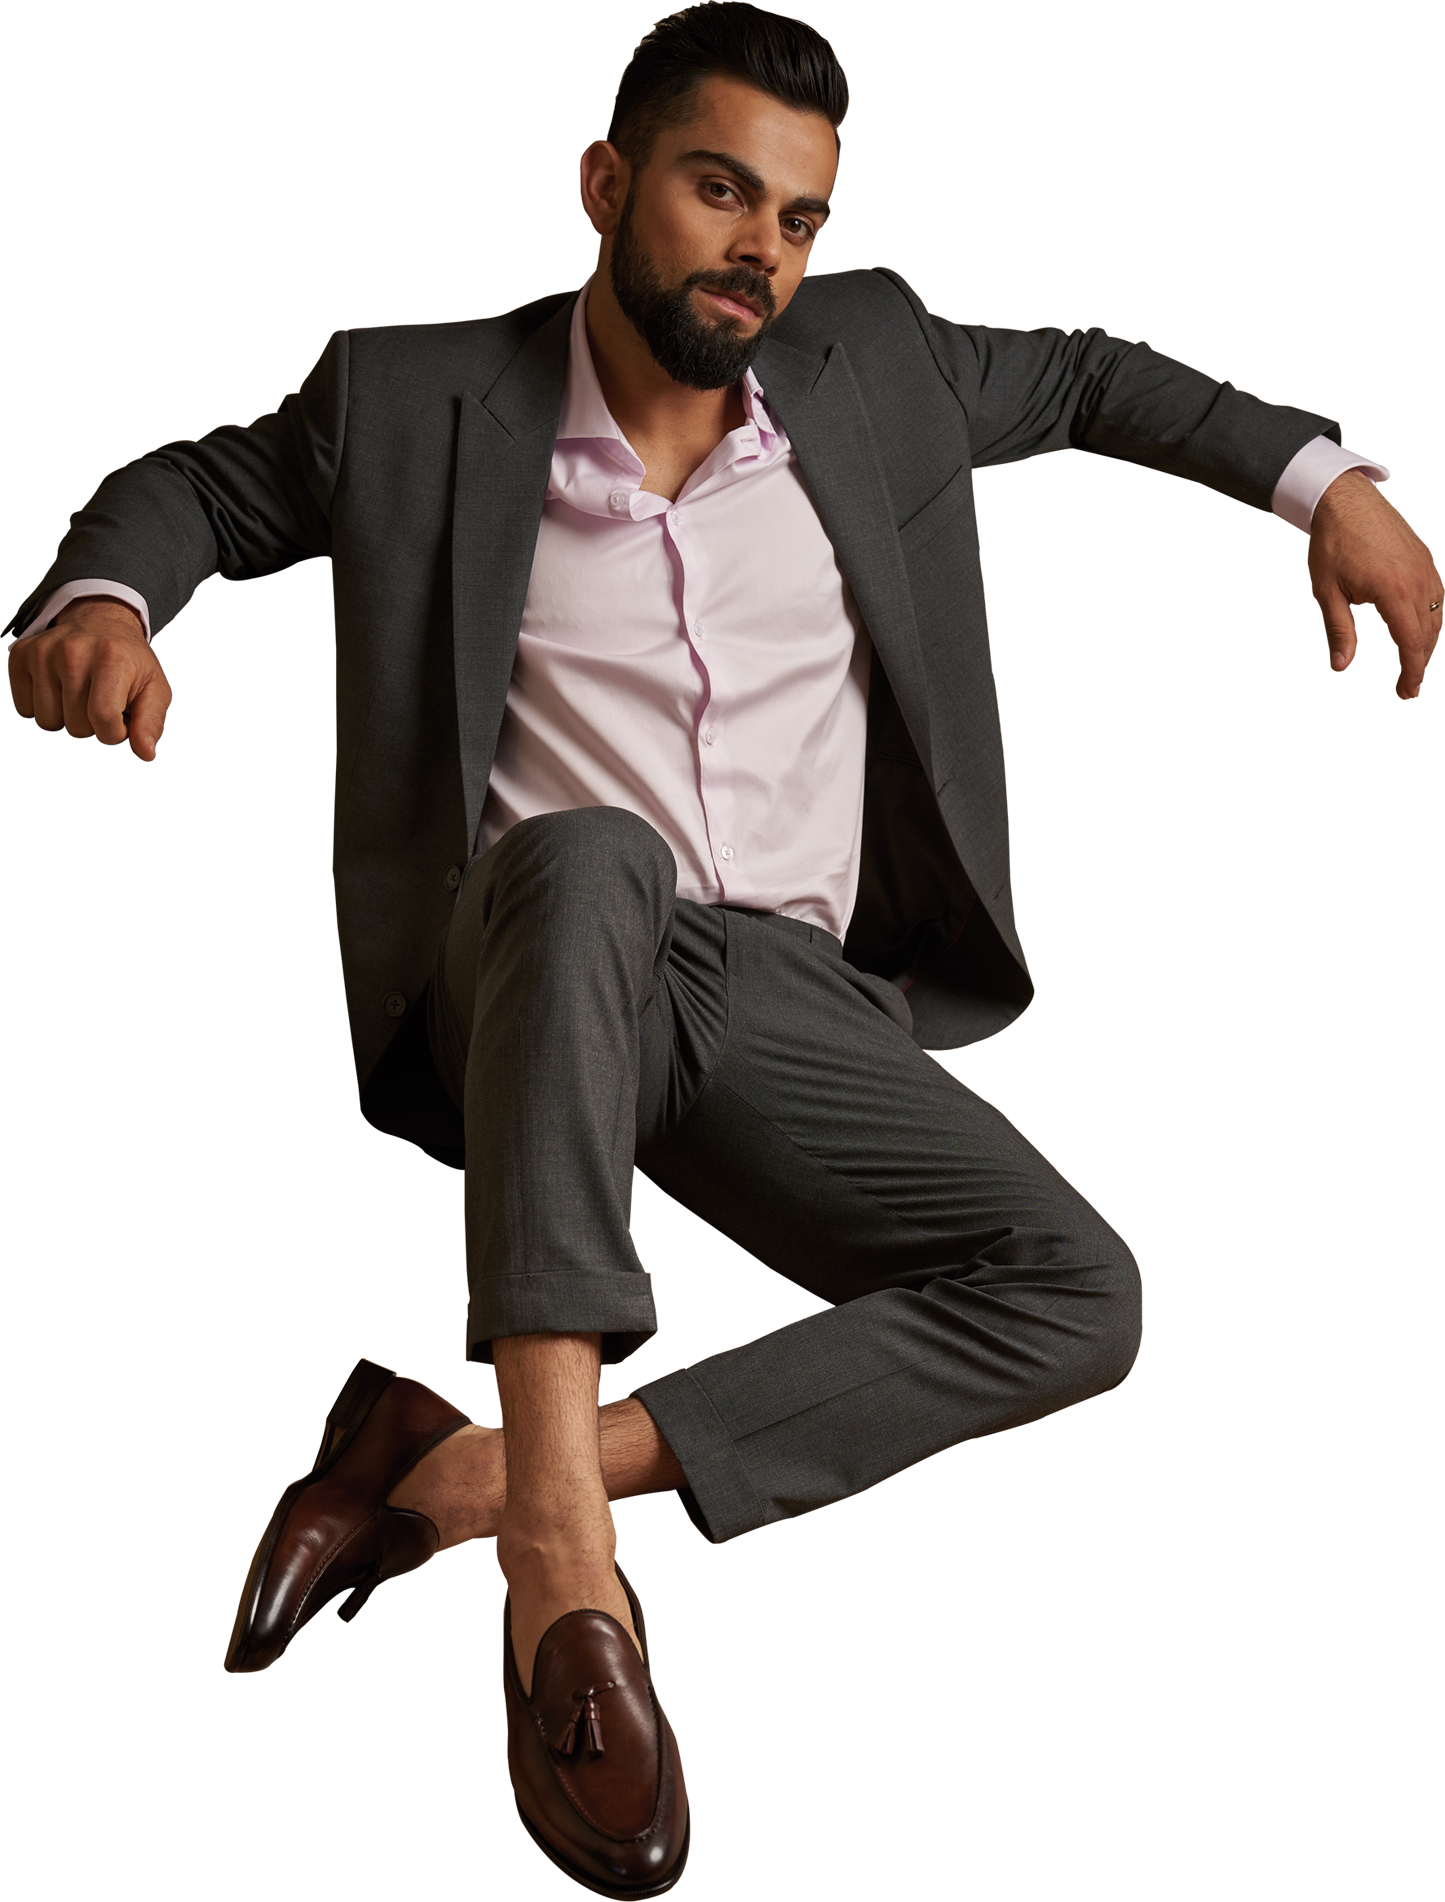 Stylish Manin Suit Seated Pose PNG